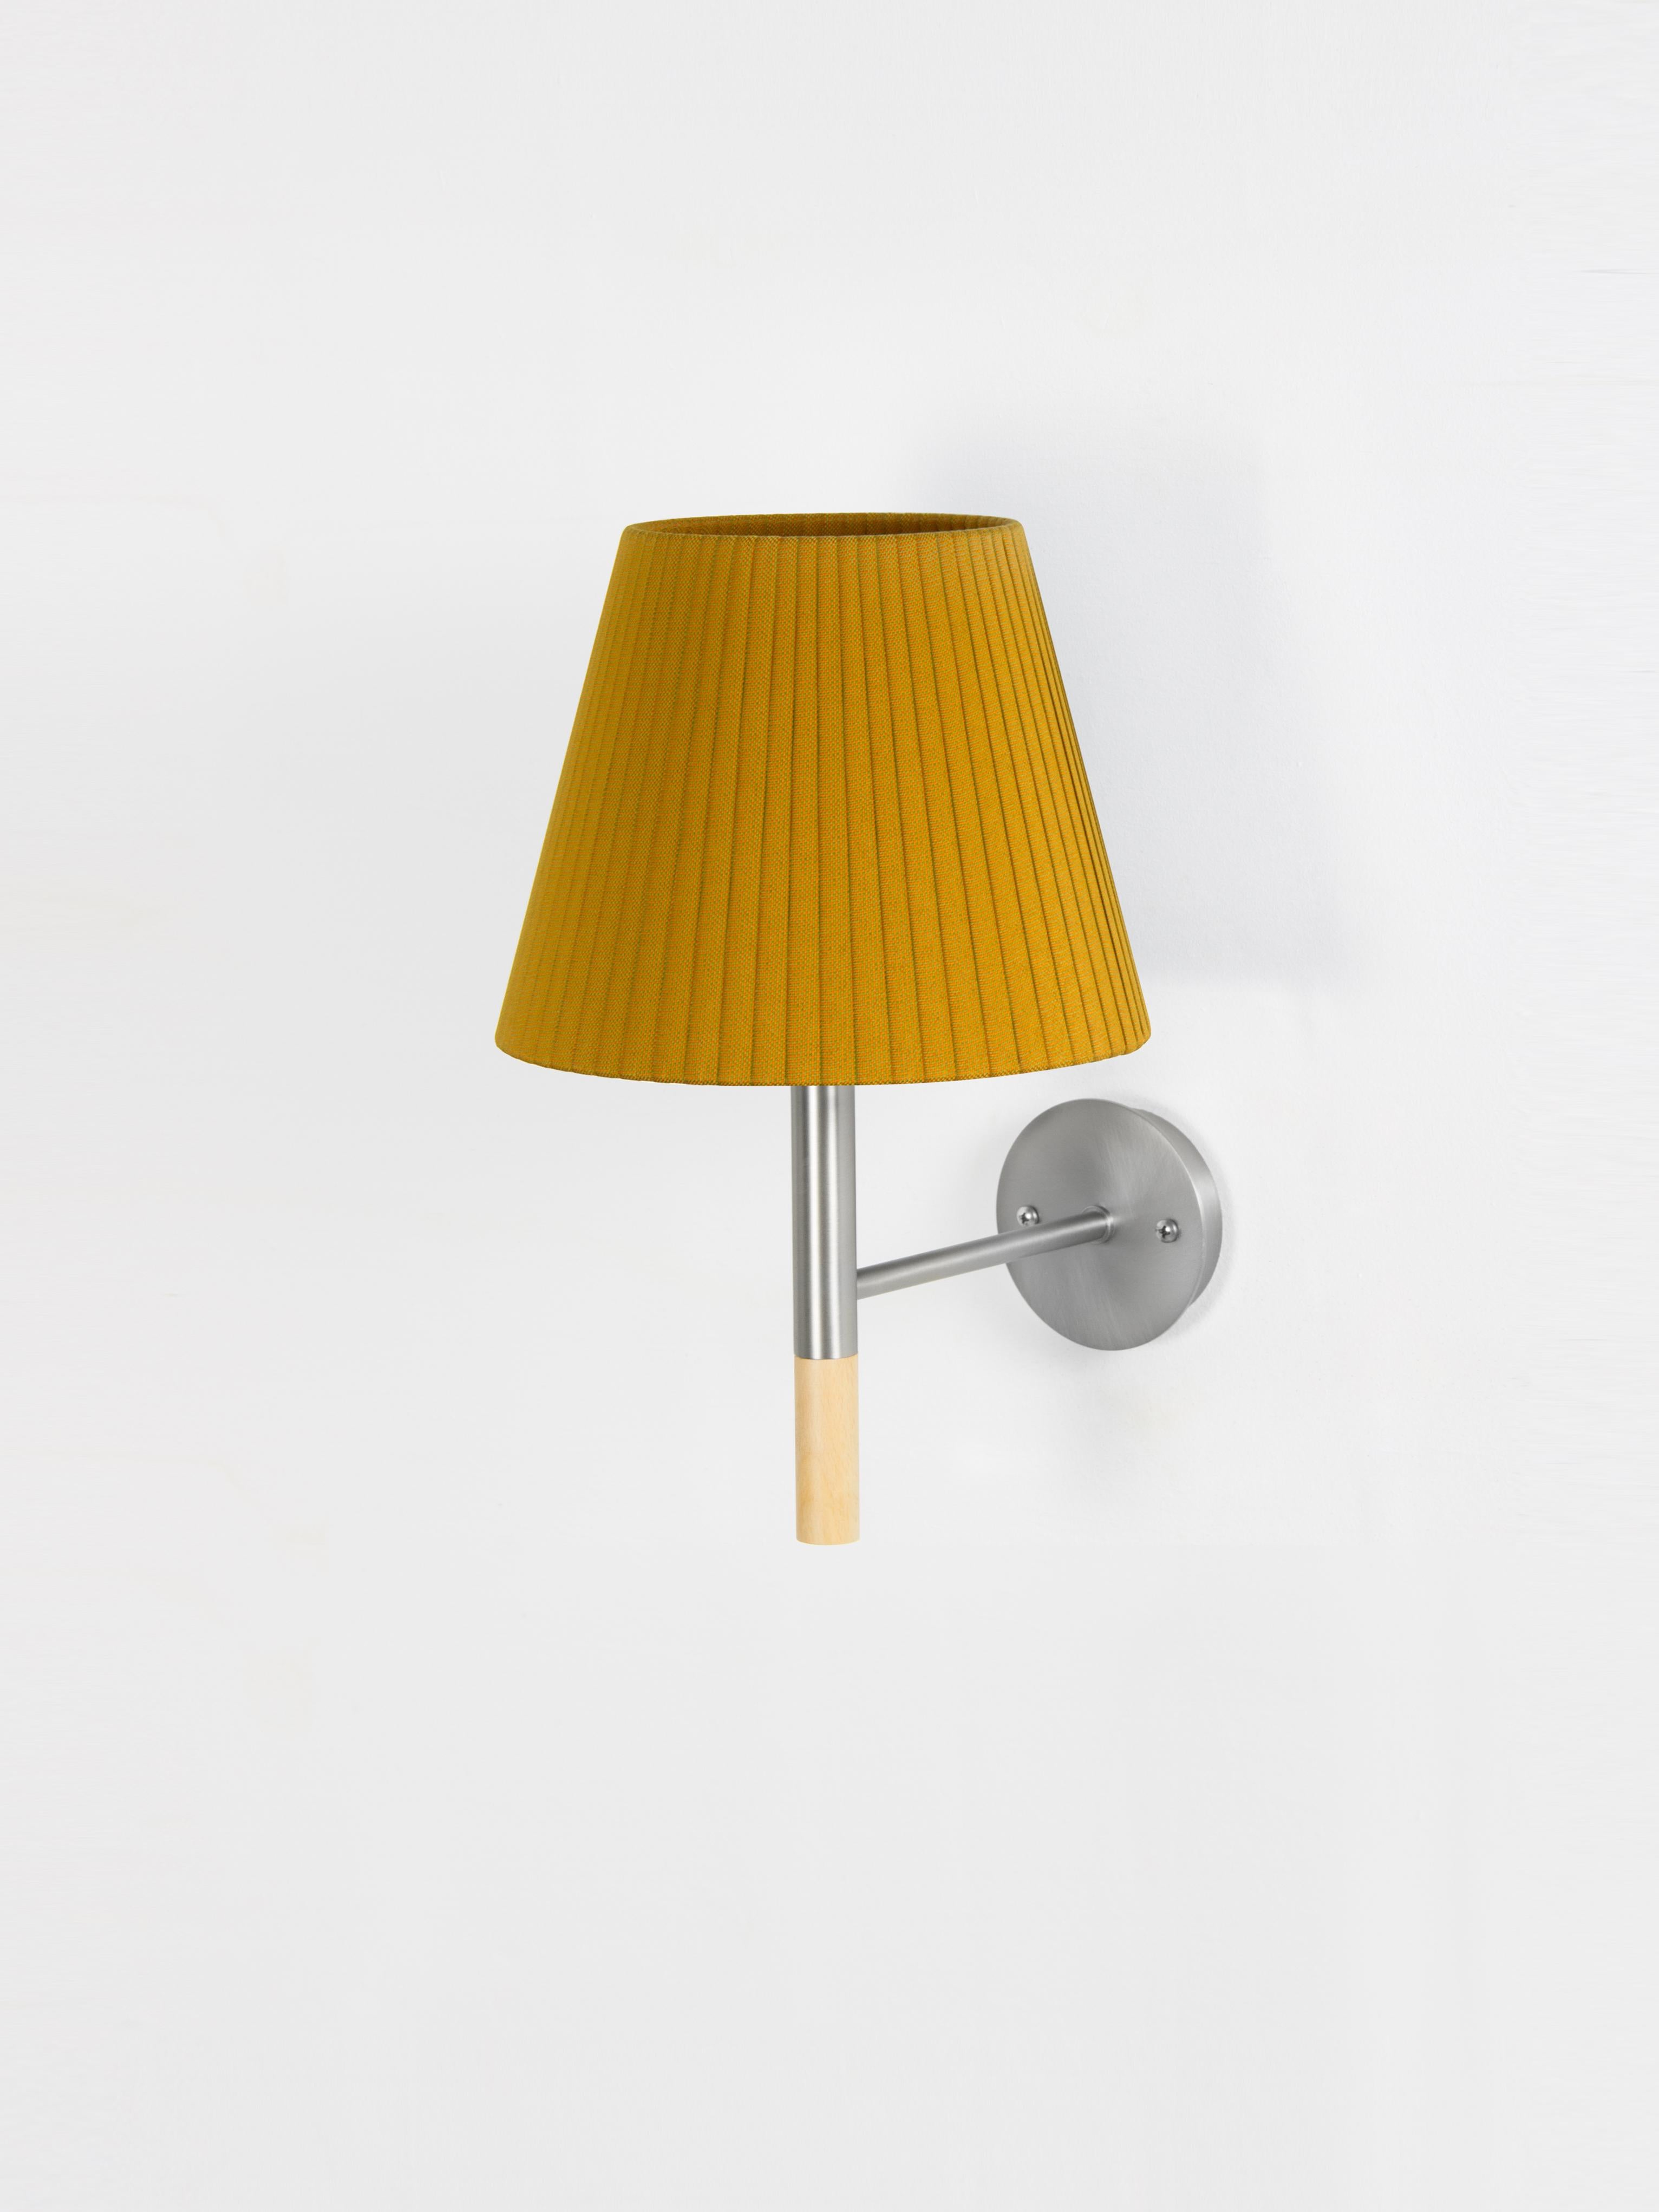 Mustard BC2 wall lamp by Santa & Cole
Dimensions: D 20 x W 26 x H 33 cm.
Materials: metal, beech wood, ribbon.

The BC1, BC2 and BC3 wall lamps are the epitome of sturdy construction, aesthetic sobriety and functional quality. Their various